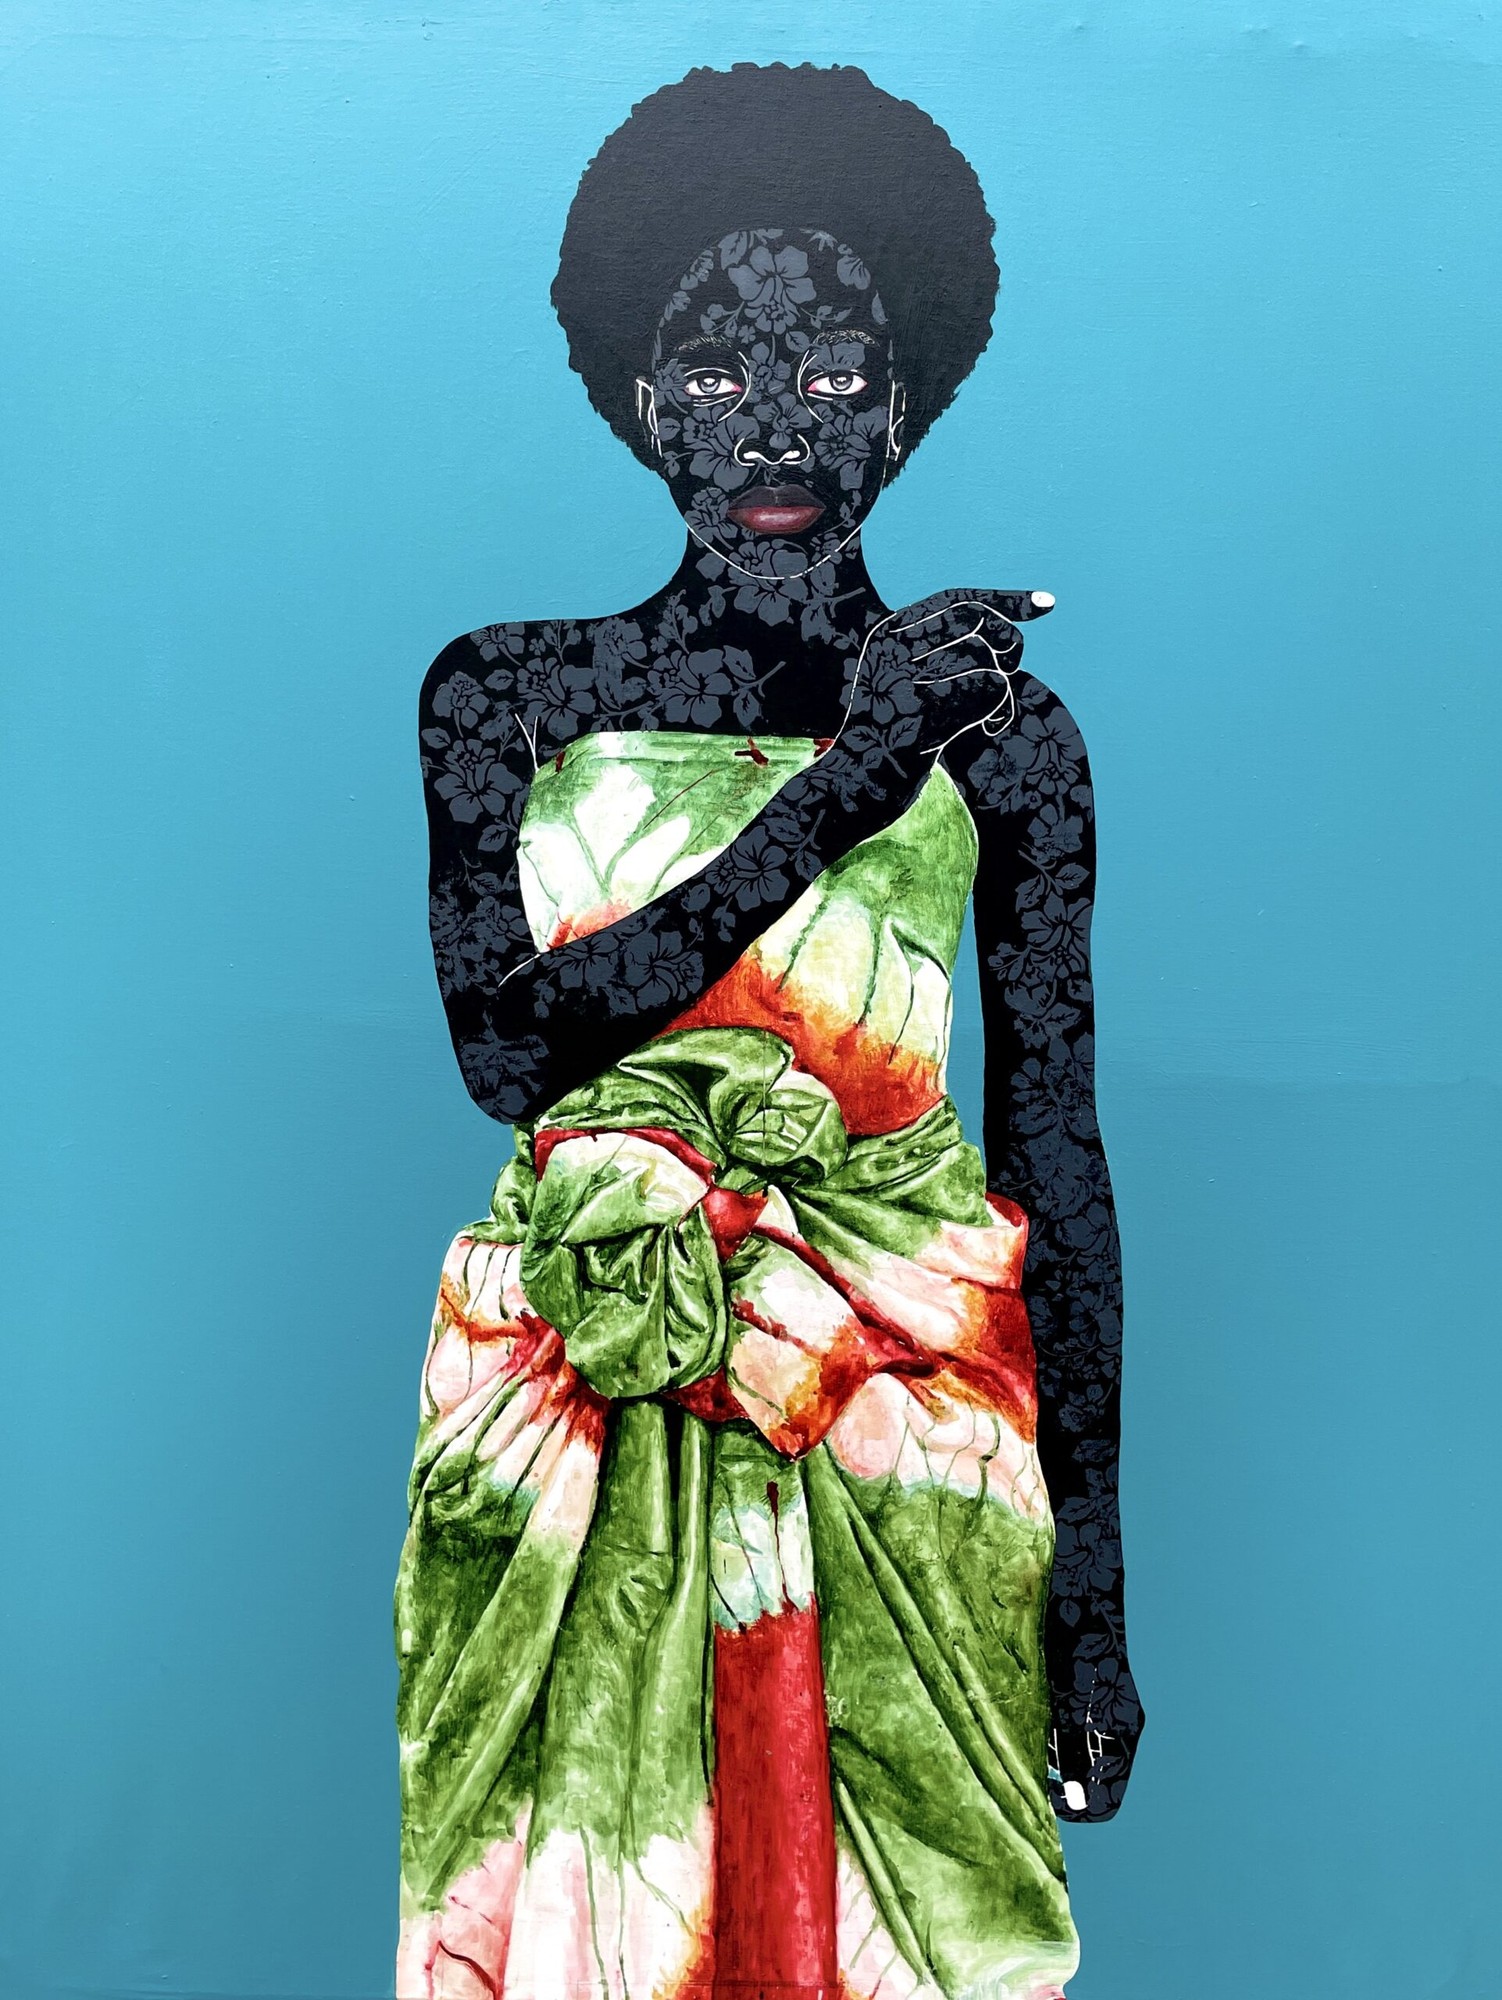 Victor Olaoye - Her Stare, 2022 - Local dye and acrylics on canvas - 154x121 cm